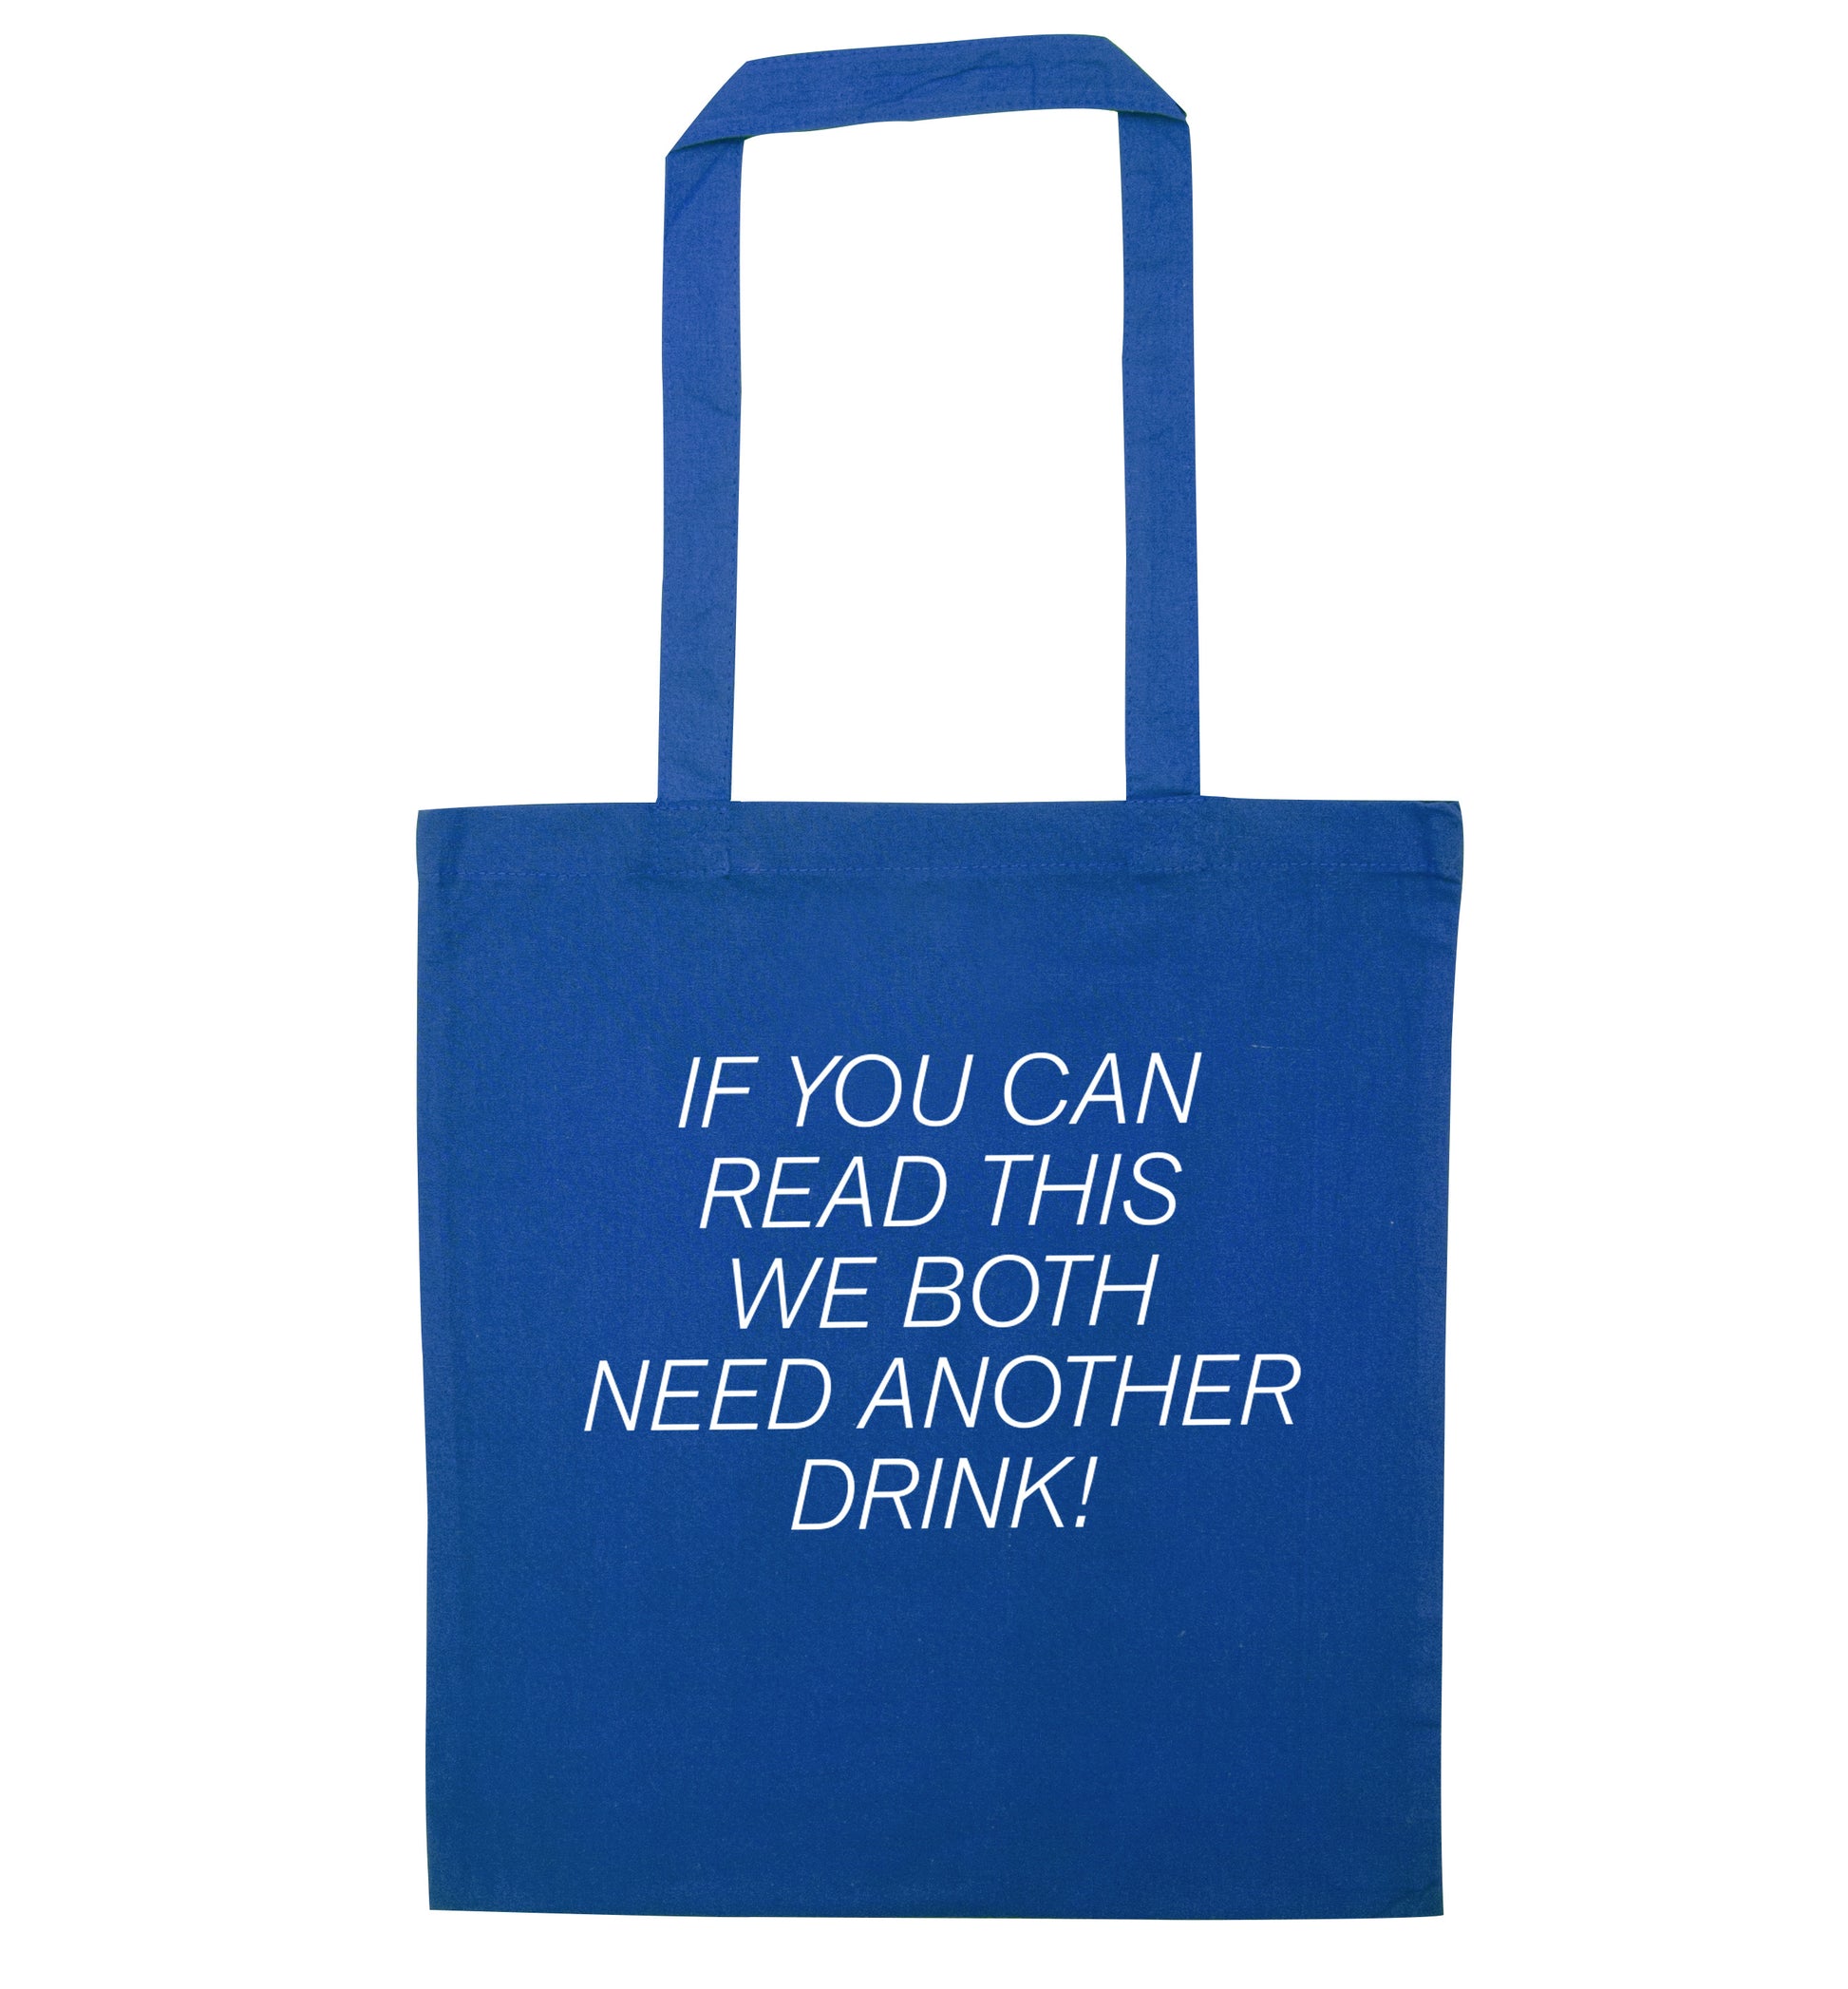 If you can read this we both need another drink! blue tote bag